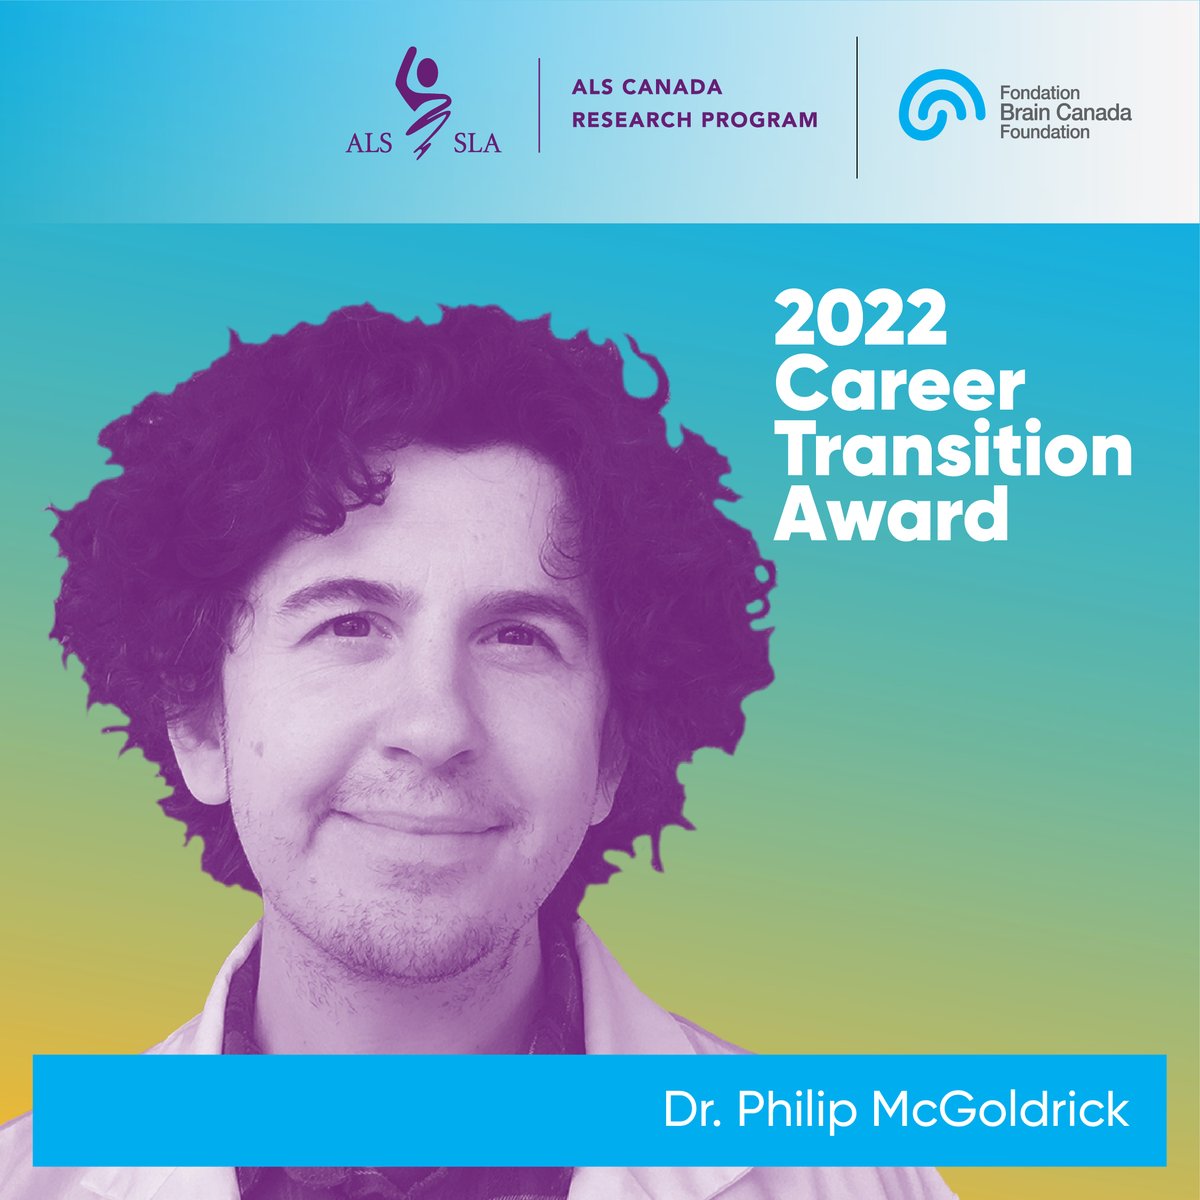 Meet Dr. Philip McGoldrick – recipient of the 2022 @ALSCanada-@BrainCanada Career Transition Award. Inspired to study neurodegenerative disease at a young age, his studies explore mutations in the C9ORF72 gene – the most common genetic cause of ALS. Read: bit.ly/3FeKkmF.